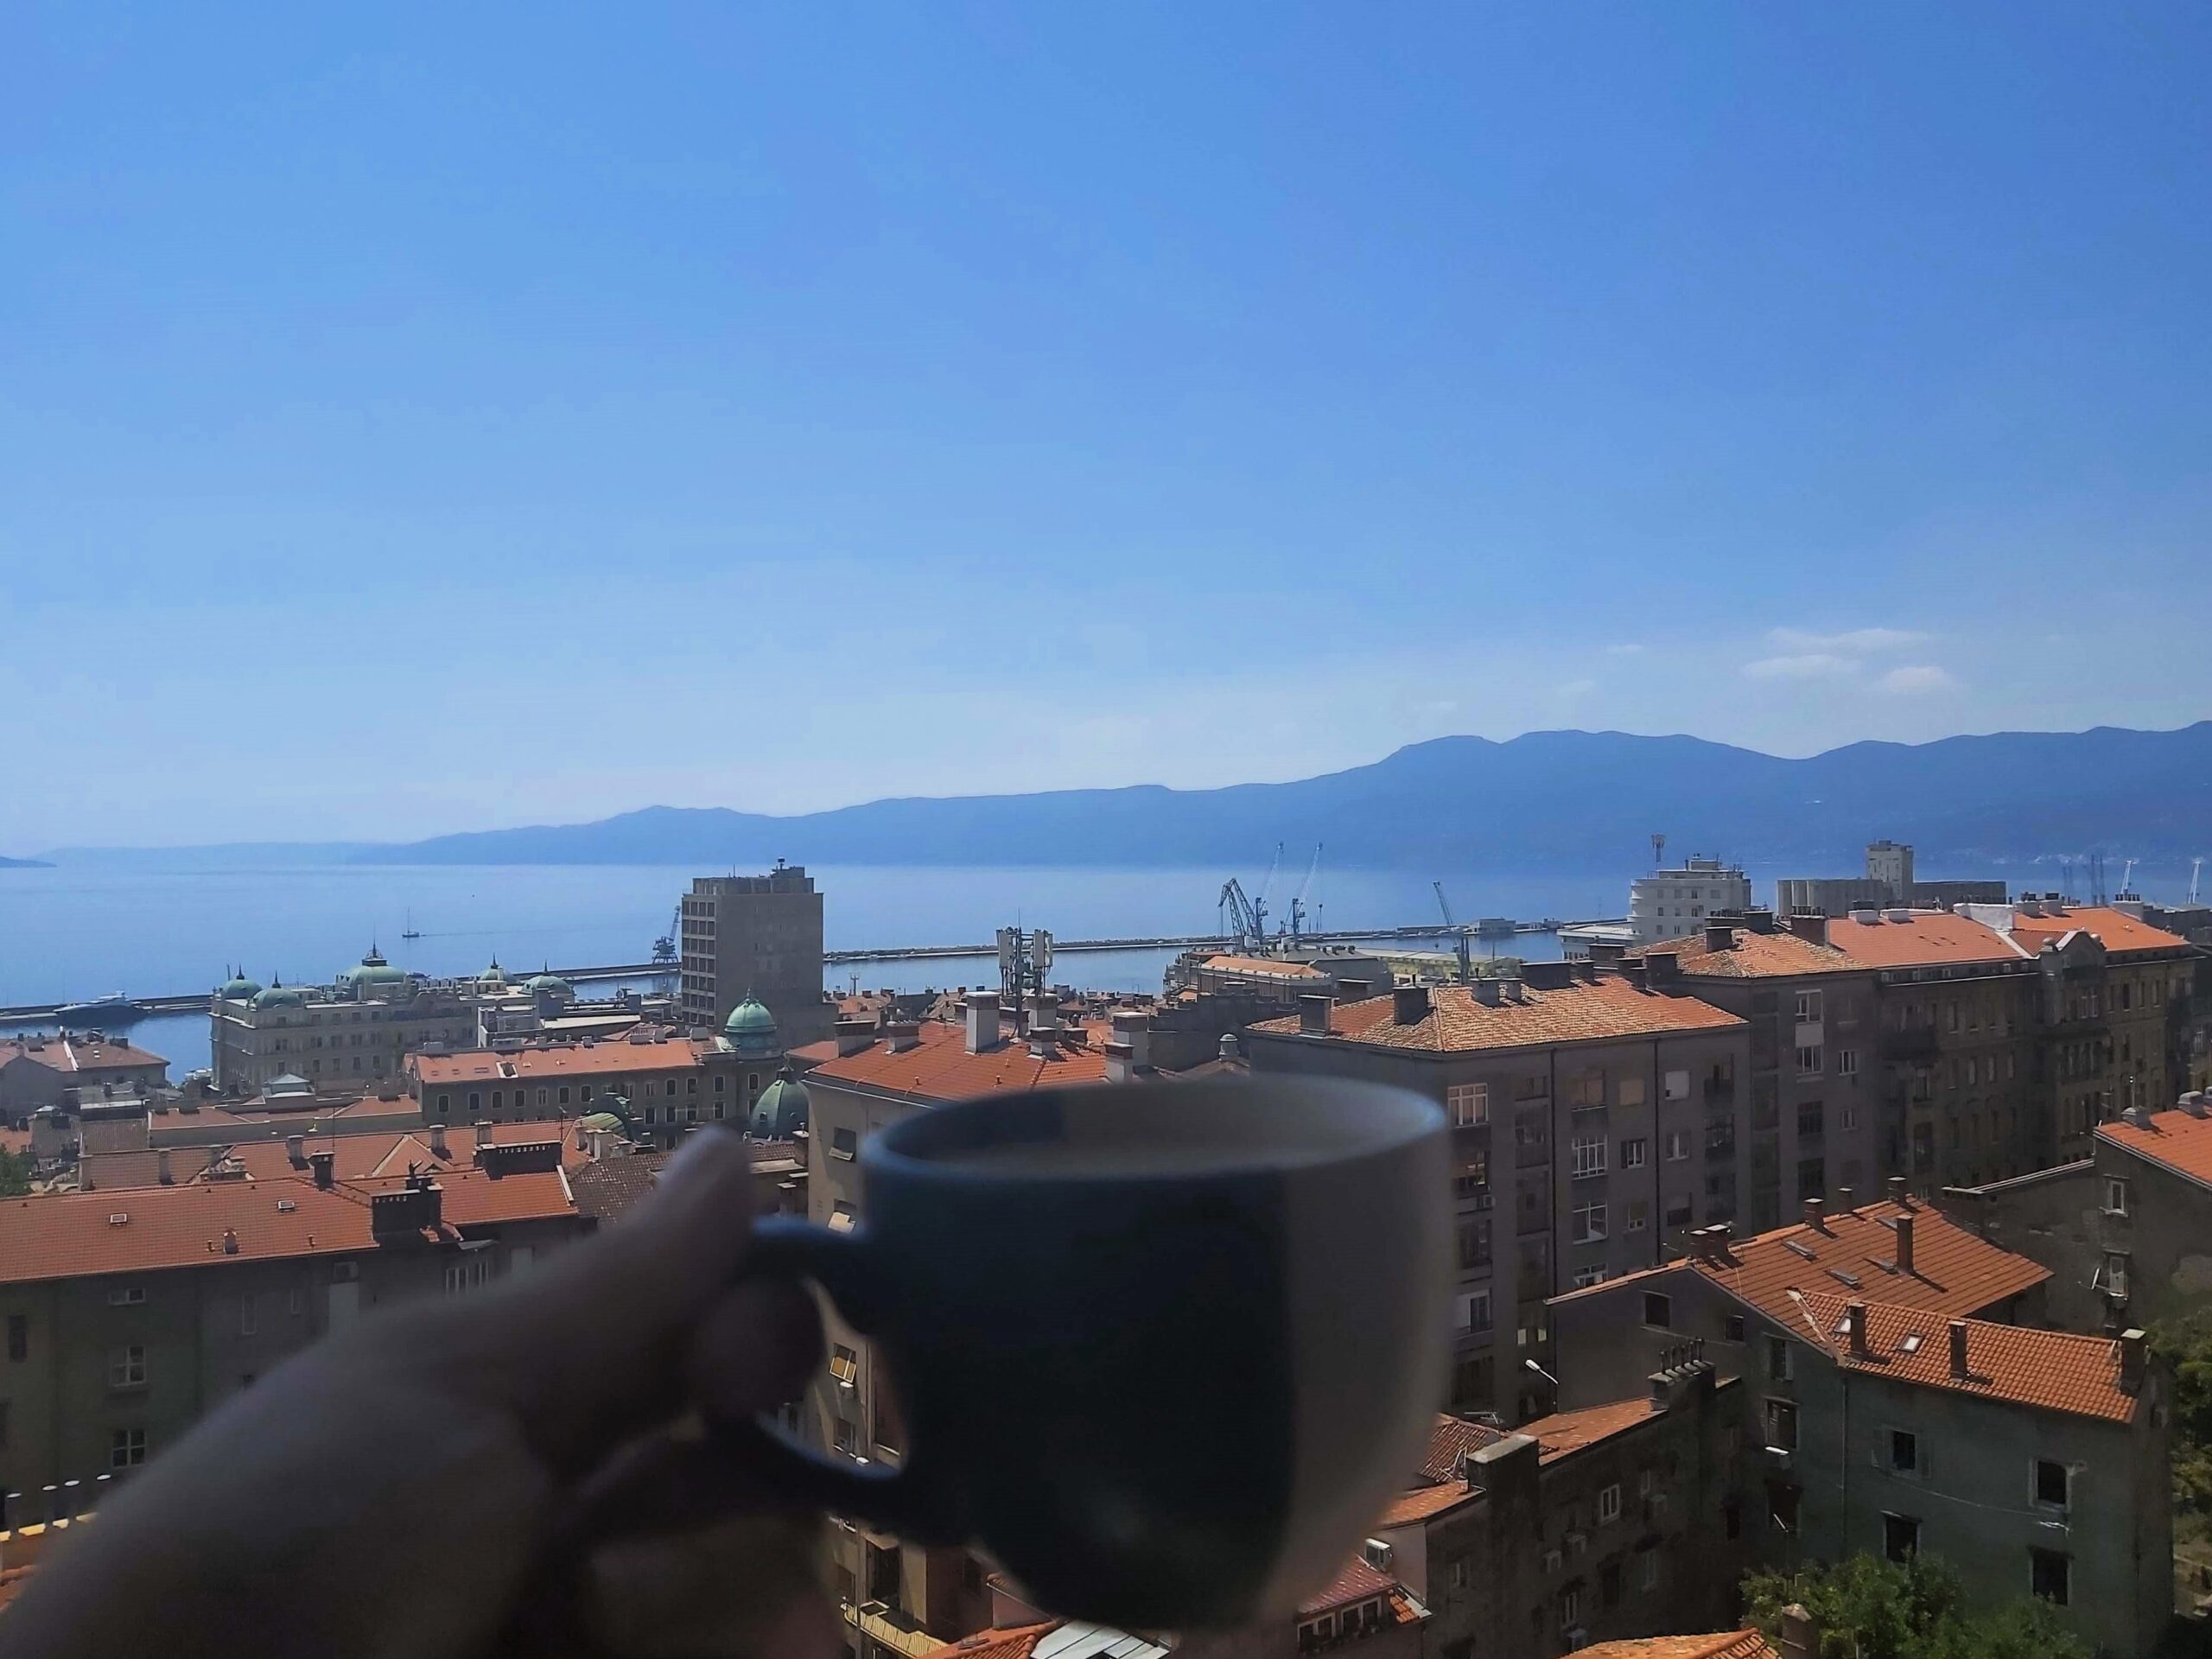 Wandering Lewis holds an espresso up against the mountainous sea view from her apartment view in Rijeka, Croatia